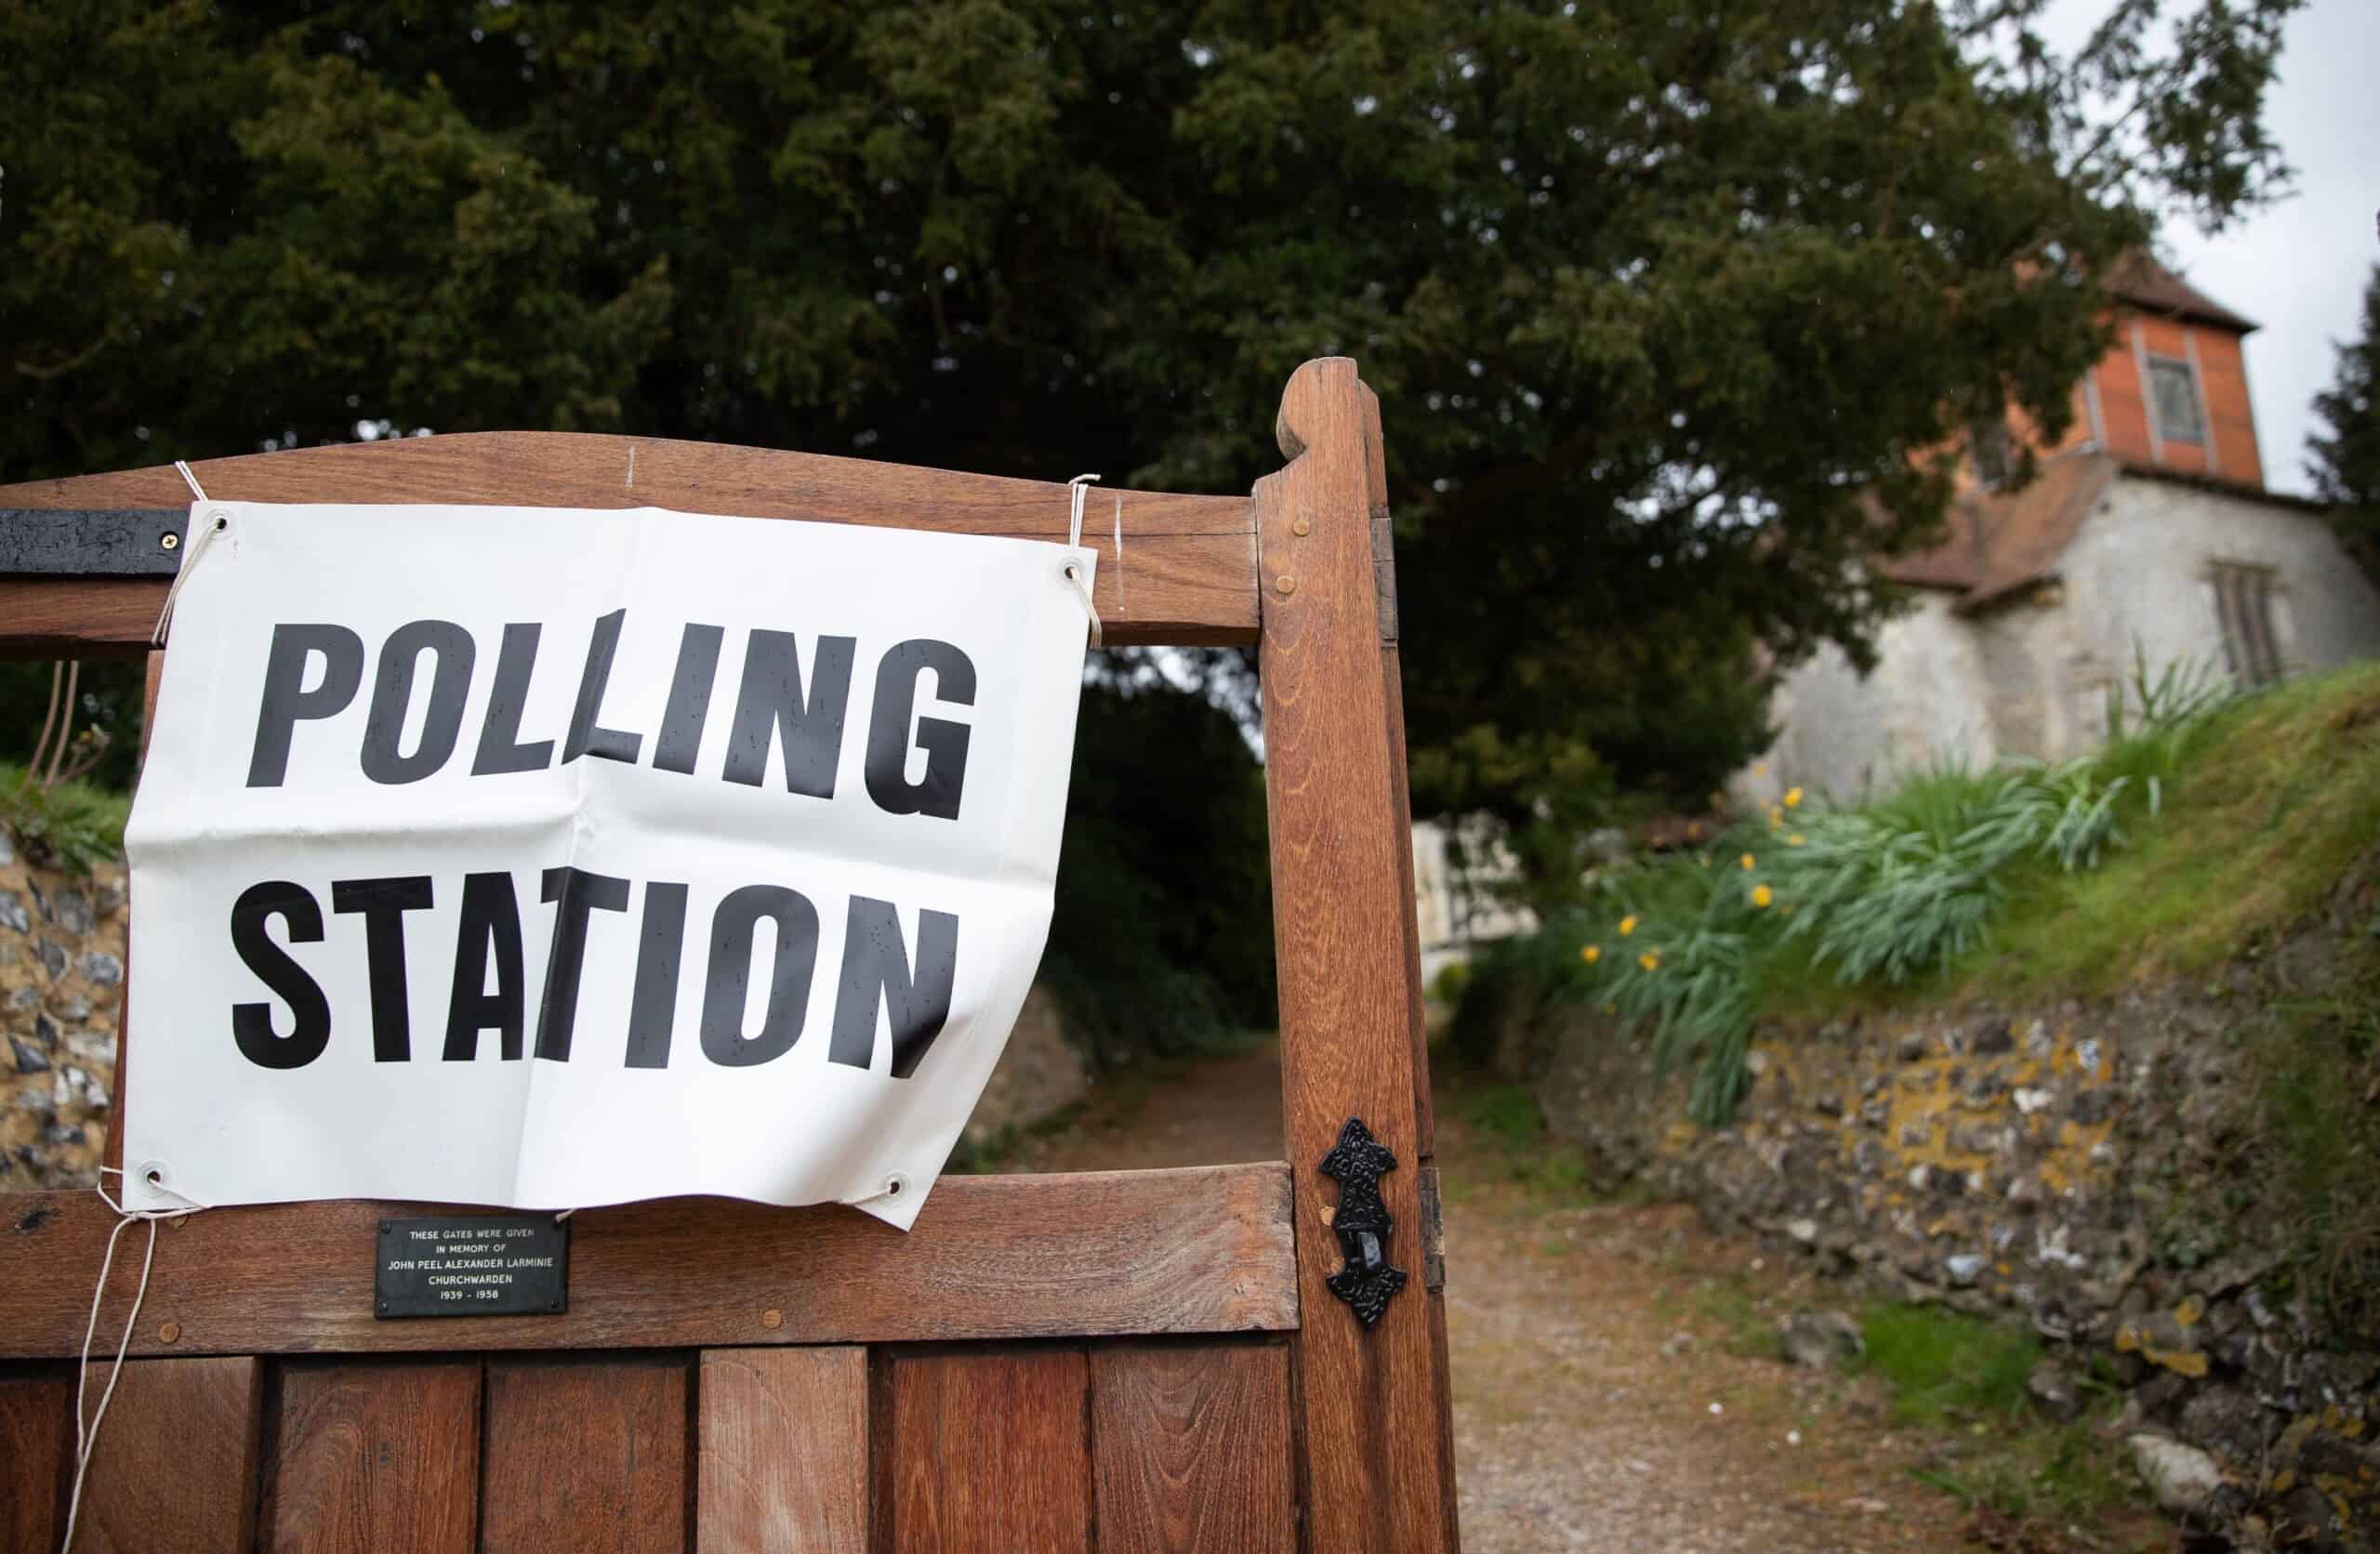 First evidence of the scale of voter disenfranchisement in local elections published